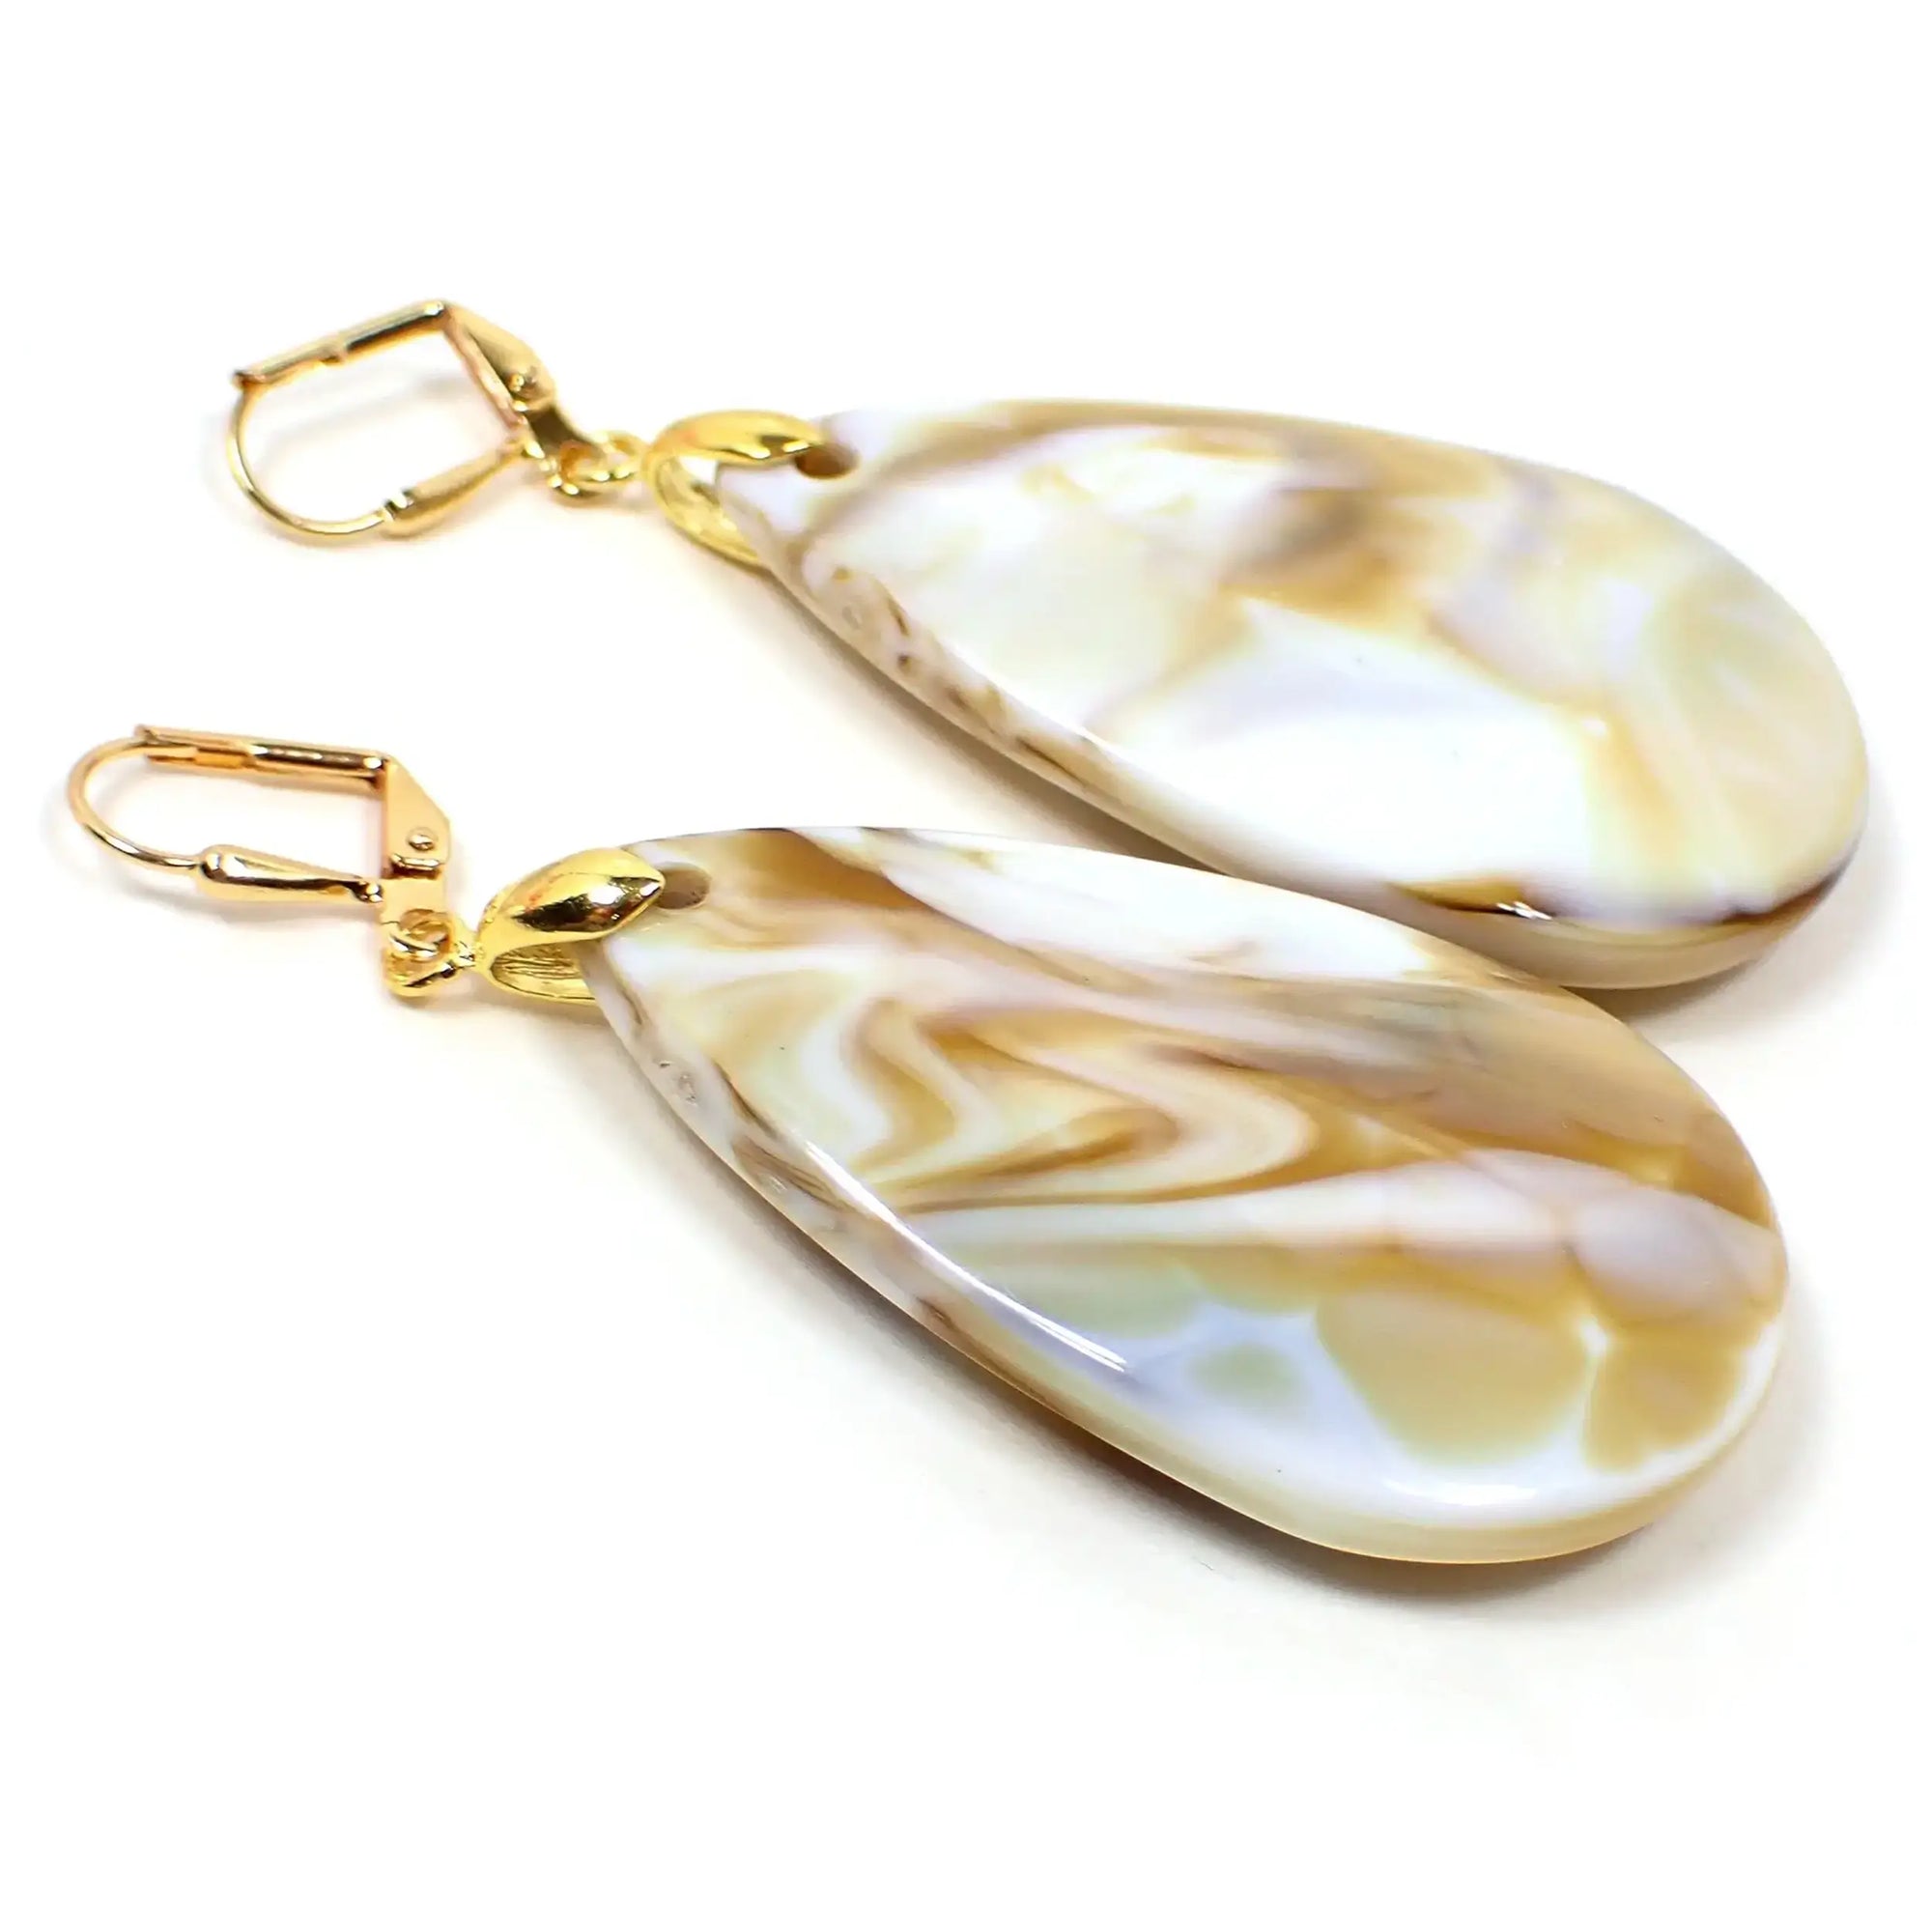 Angled view of the handmade acrylic large teardrop earrings. The metal is gold tone plated in color. They are large puffy teardrop shaped and are white with yellow and brown marbled in.